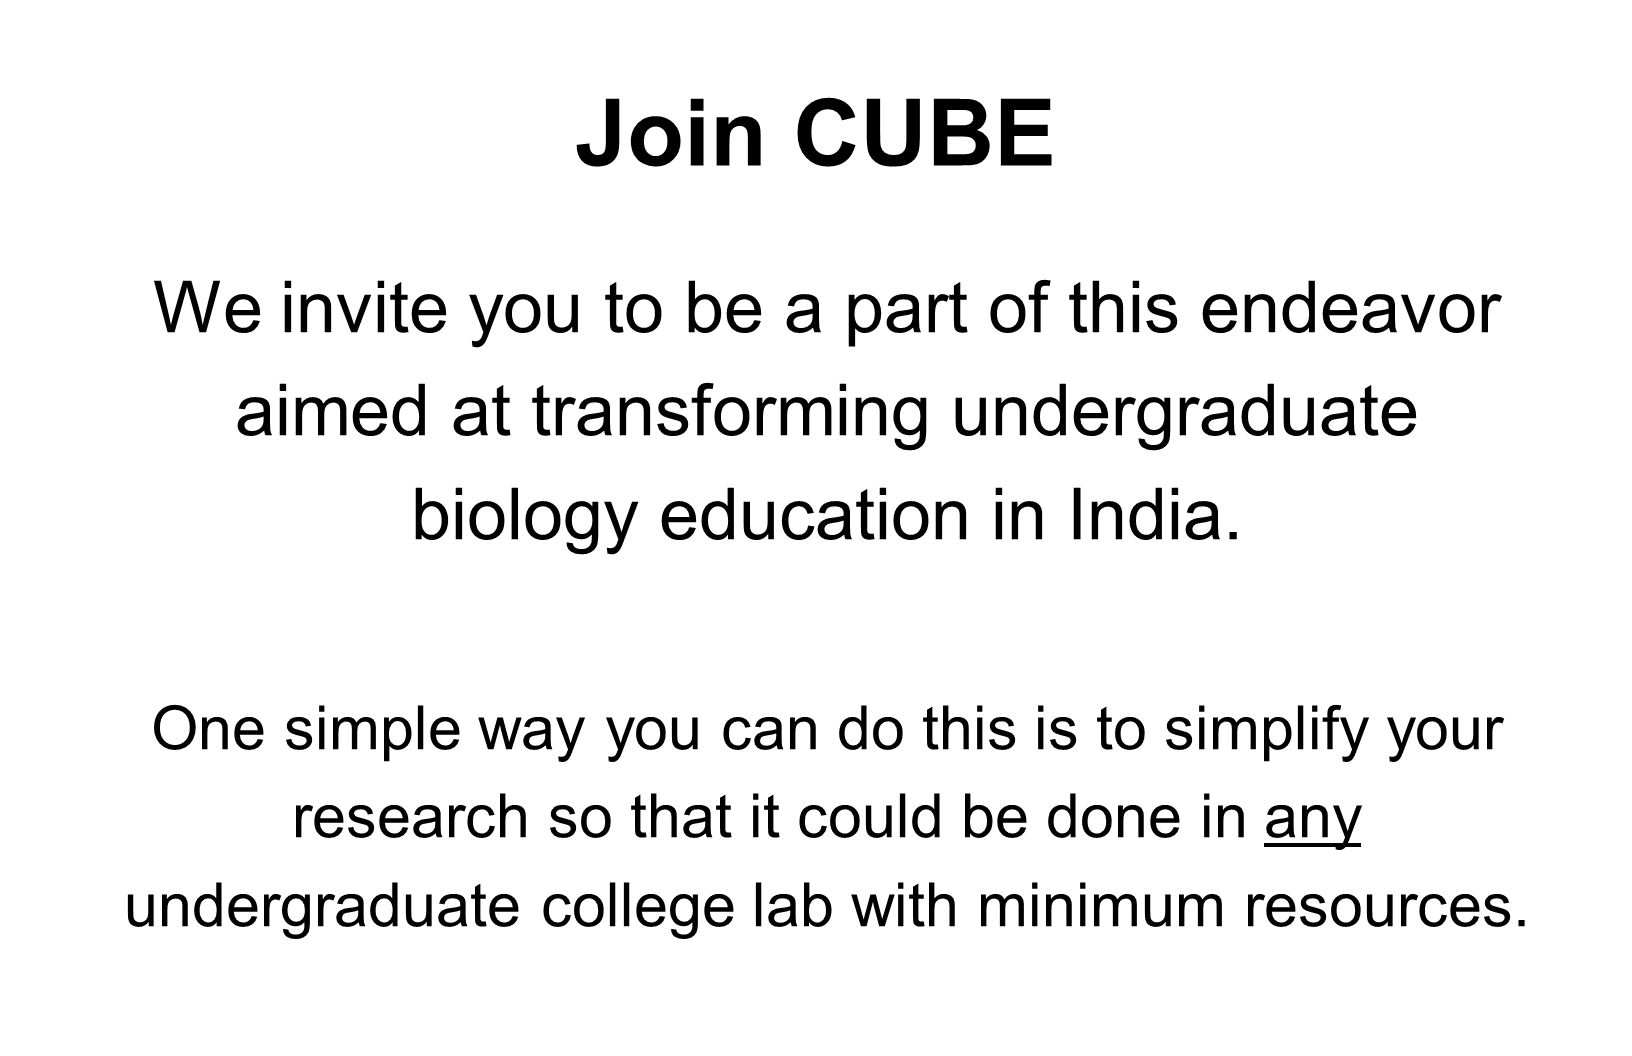 Join CUBE We invite you to be a part of this endeavor aimed at transforming undergraduate biology education in India.